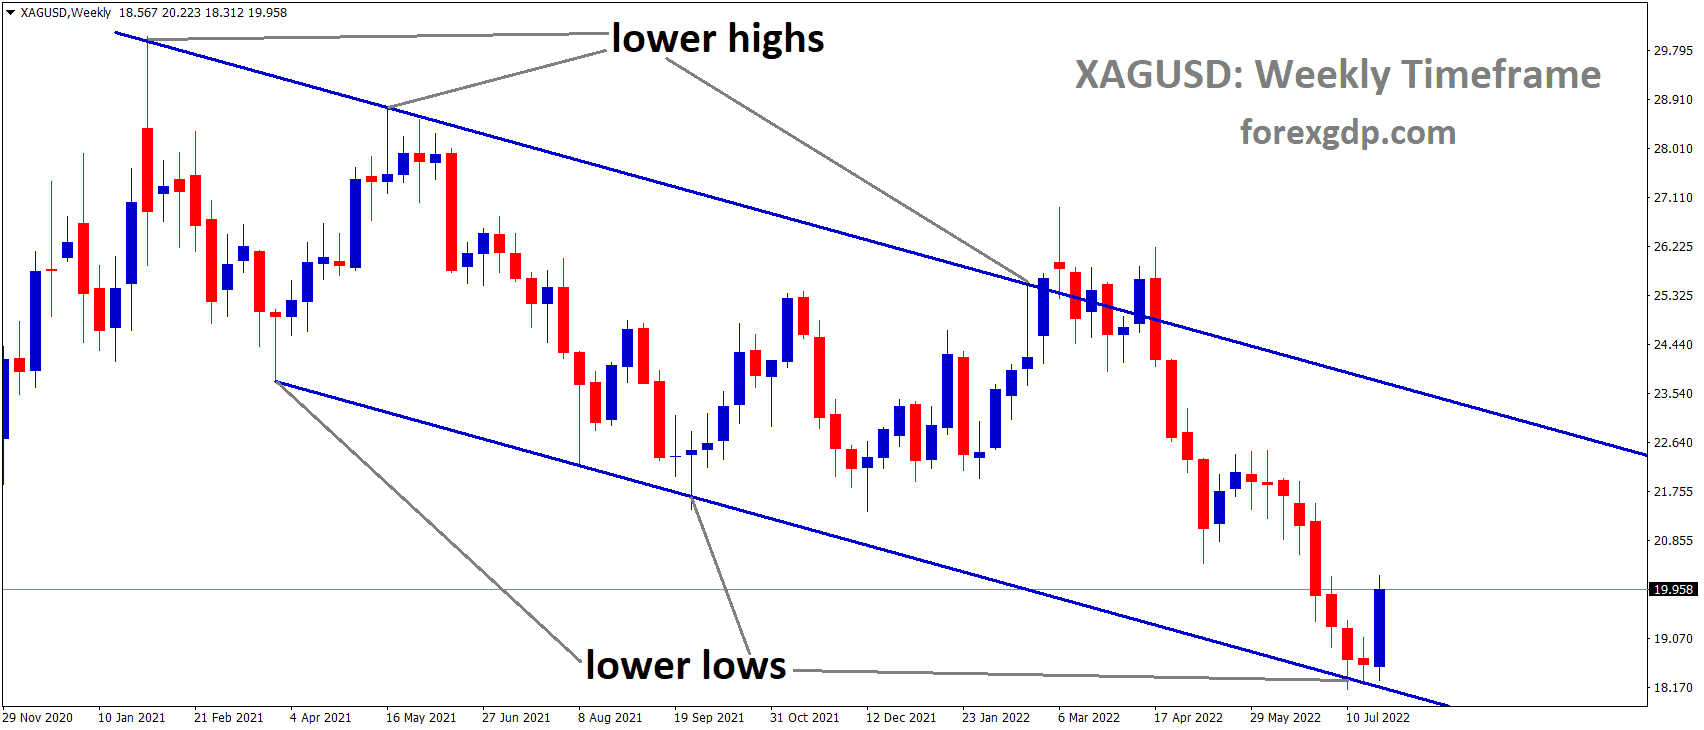 XAGUSD Silver Price is moving in the Descending channel and the Market has rebounded from the Lower low area of the channel